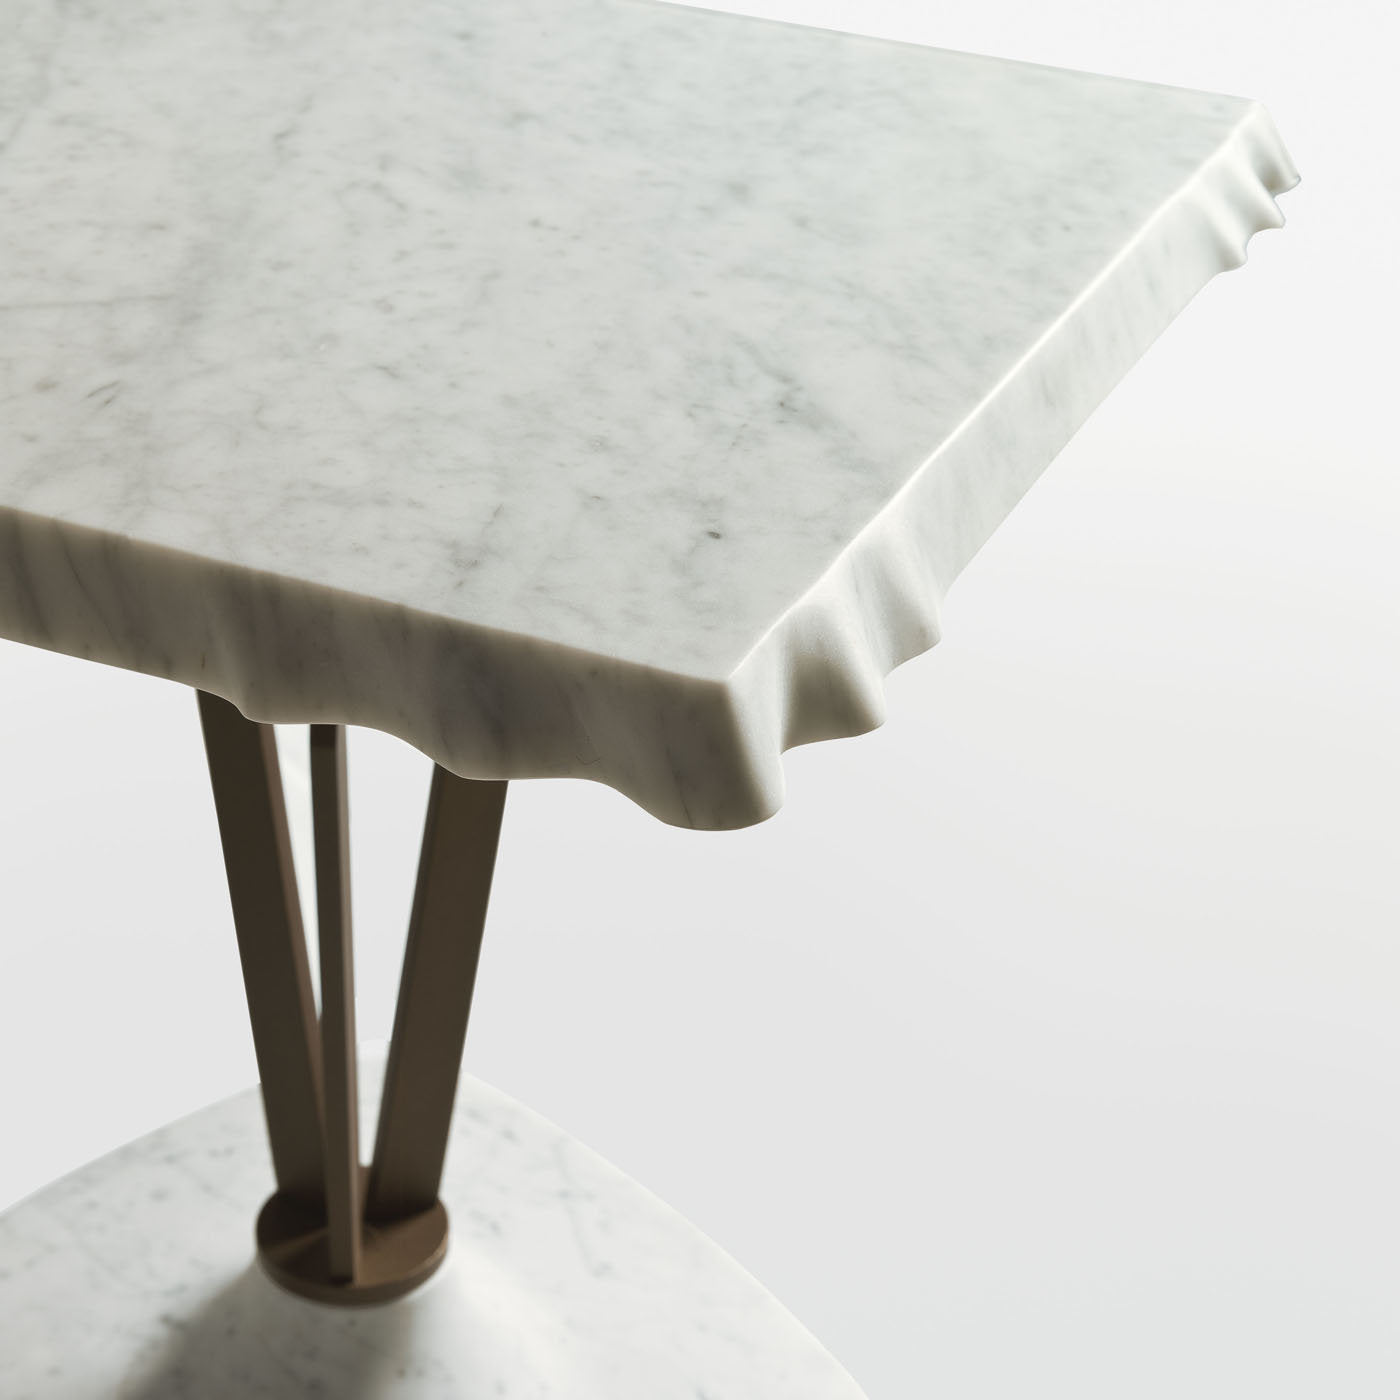 Wave Side Table with Square Top and Metal by Paolo Salvadè - Alternative view 1